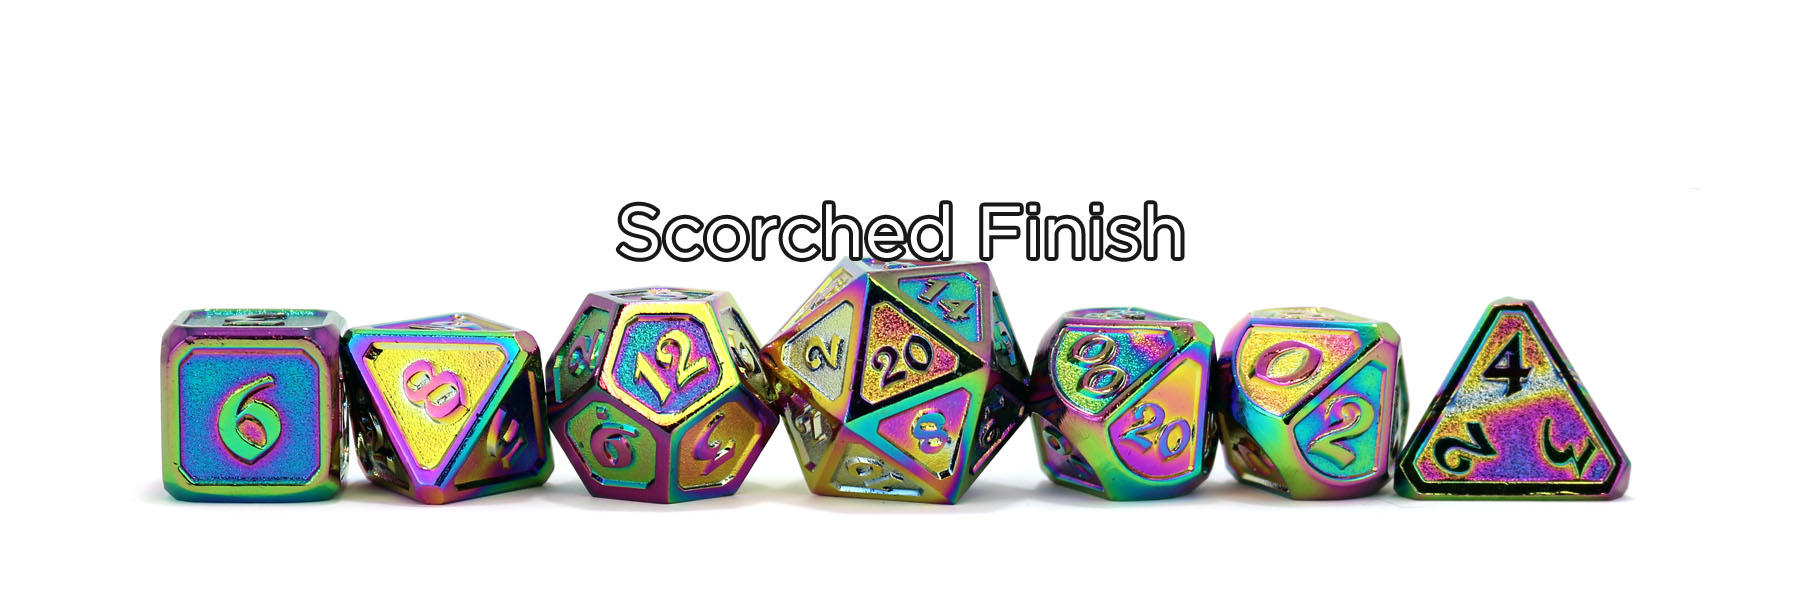 Scorched Finishes